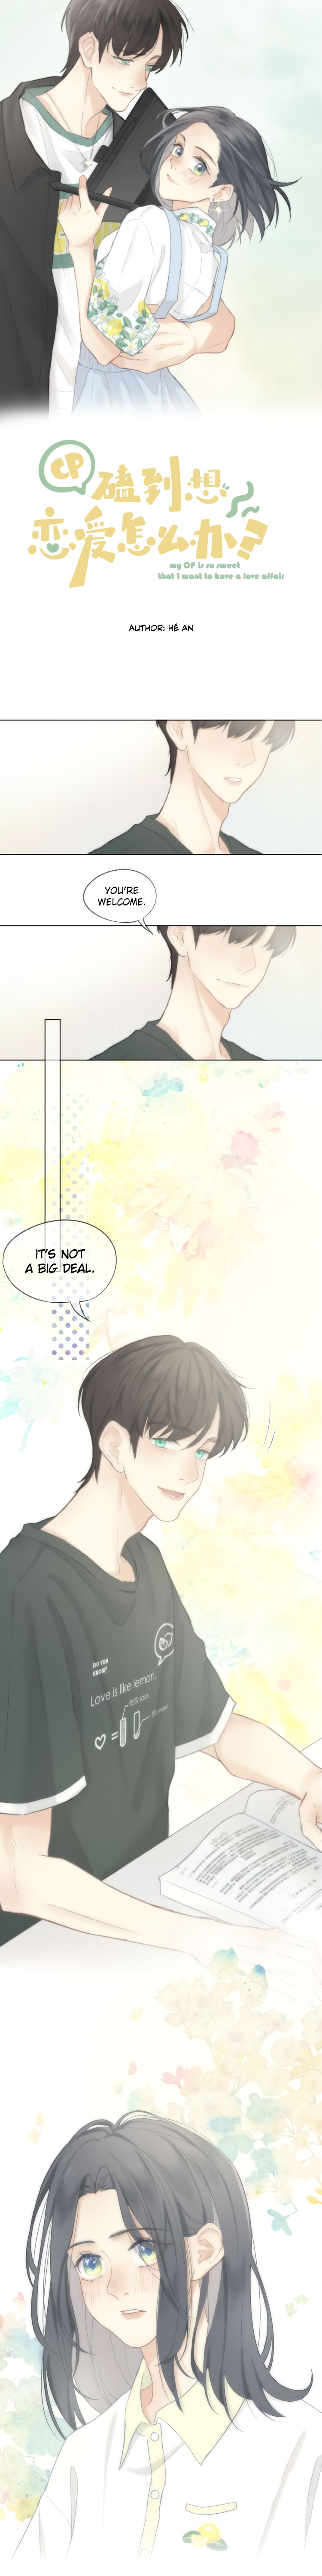 My OTP Is So Sweet That I Want to Have a Love Affair Ch. 2